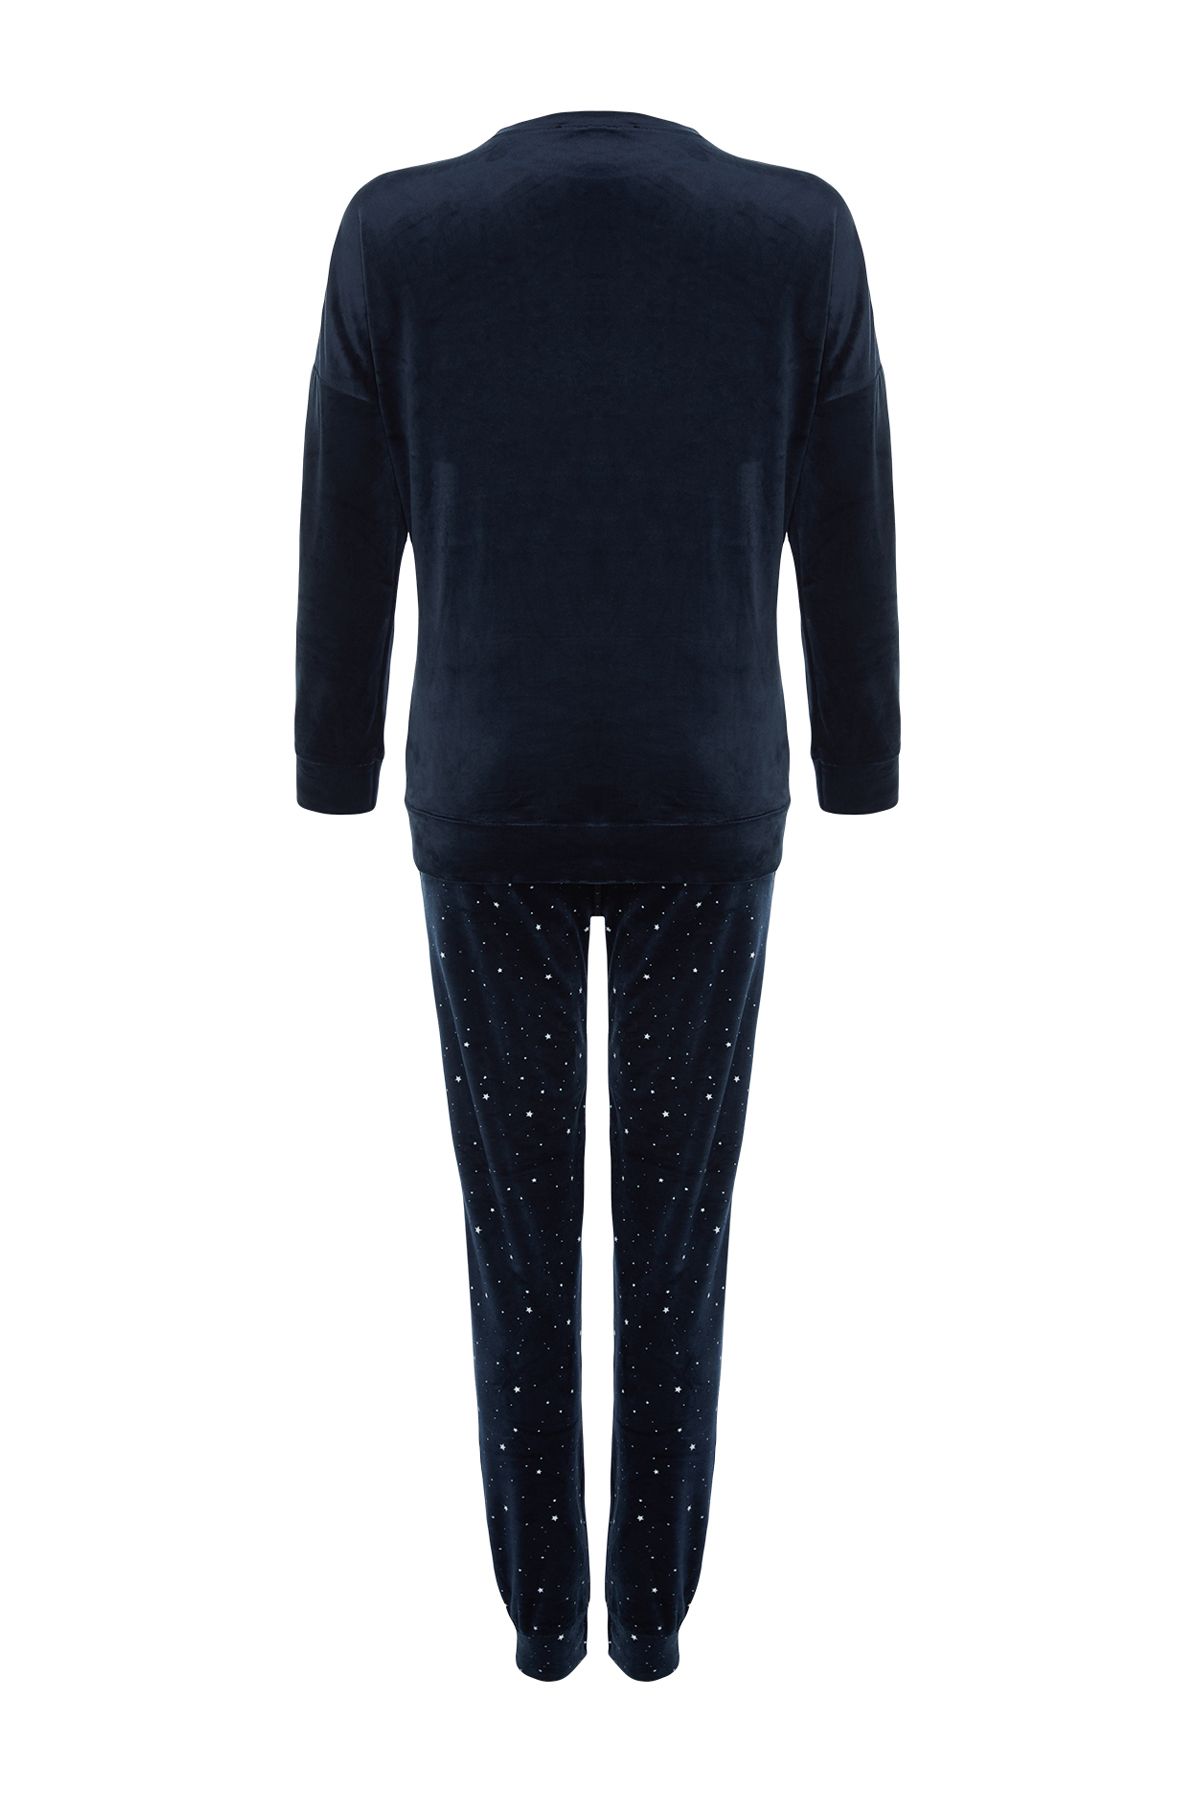 Trendyol Collection Navy Blue 100% Cotton New Year Themed Tshirt-Jogger  Knitted Pajama Set THMAW21PT0771 - Trendyol